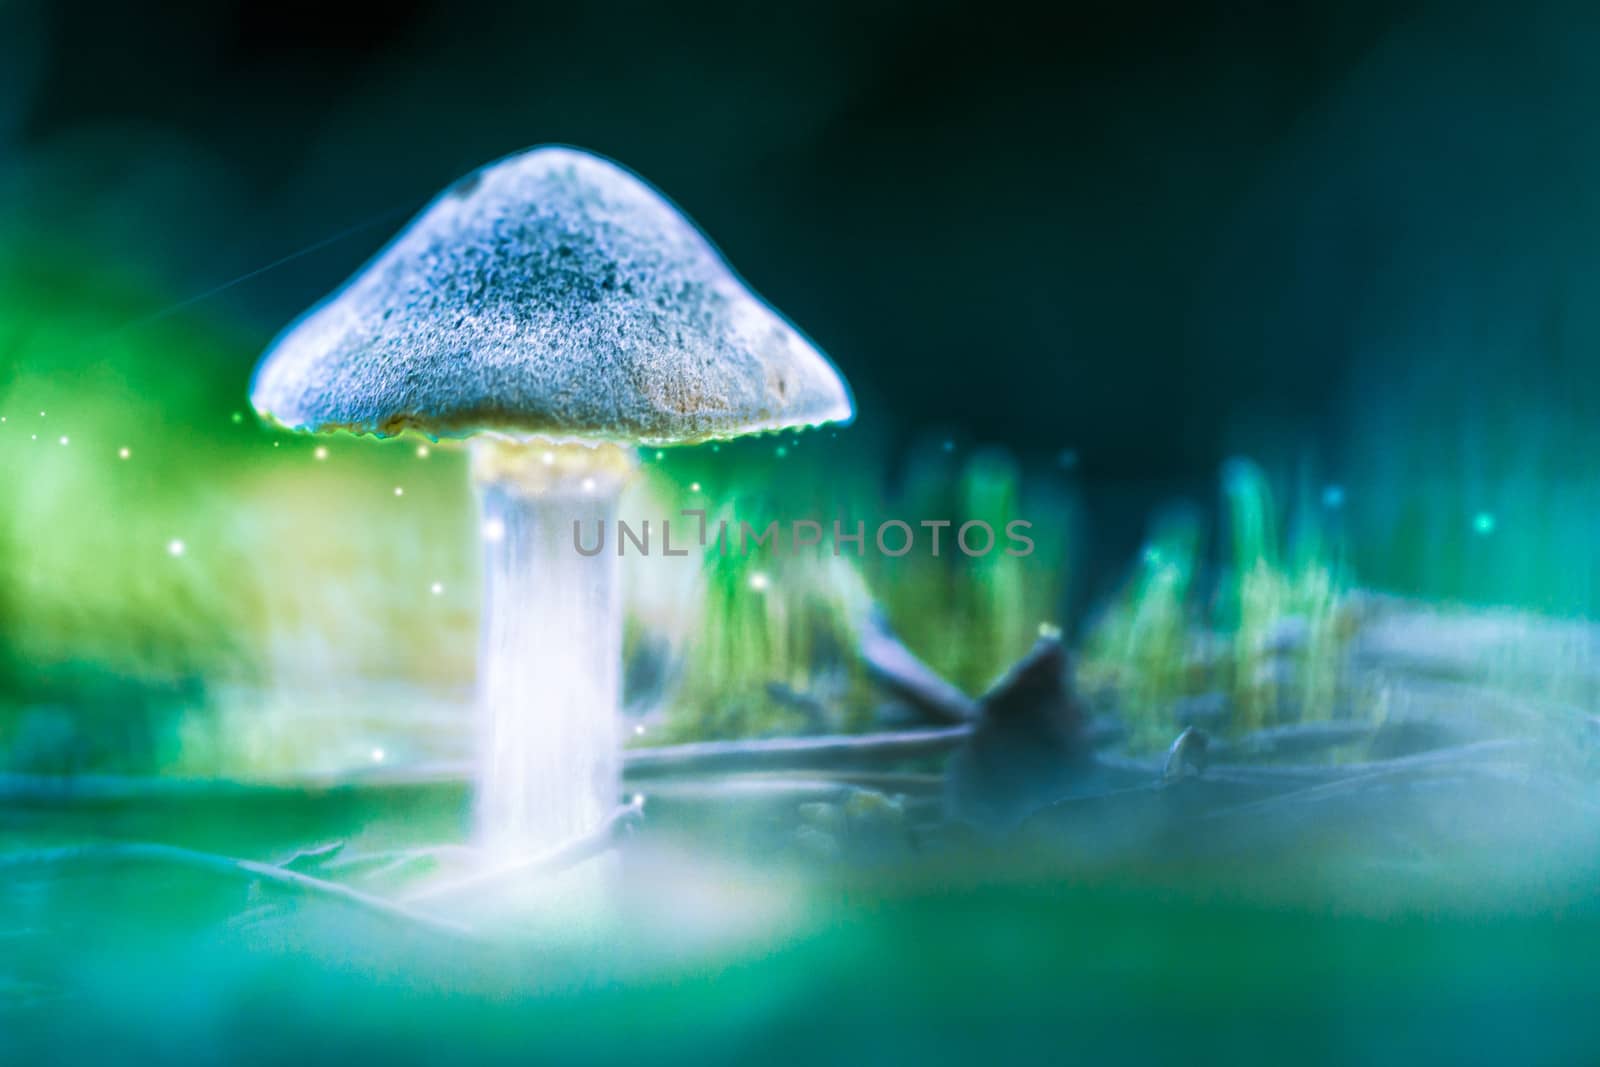 Mushroom with glowing spores by only4denn